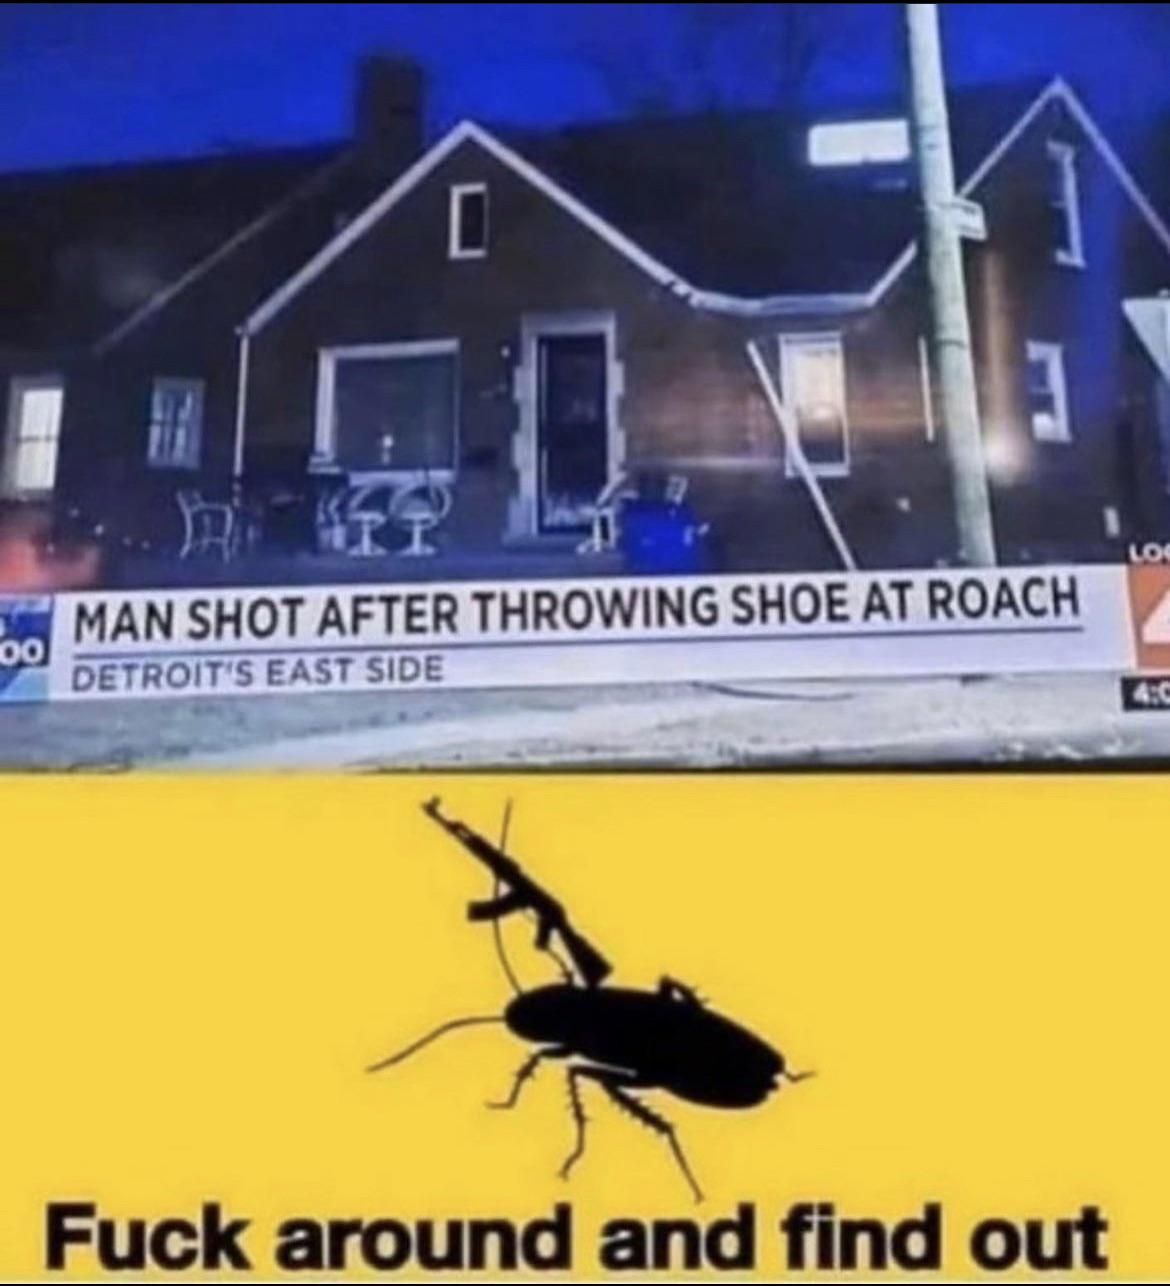 I, for one, welcome our new ***roach overlords.